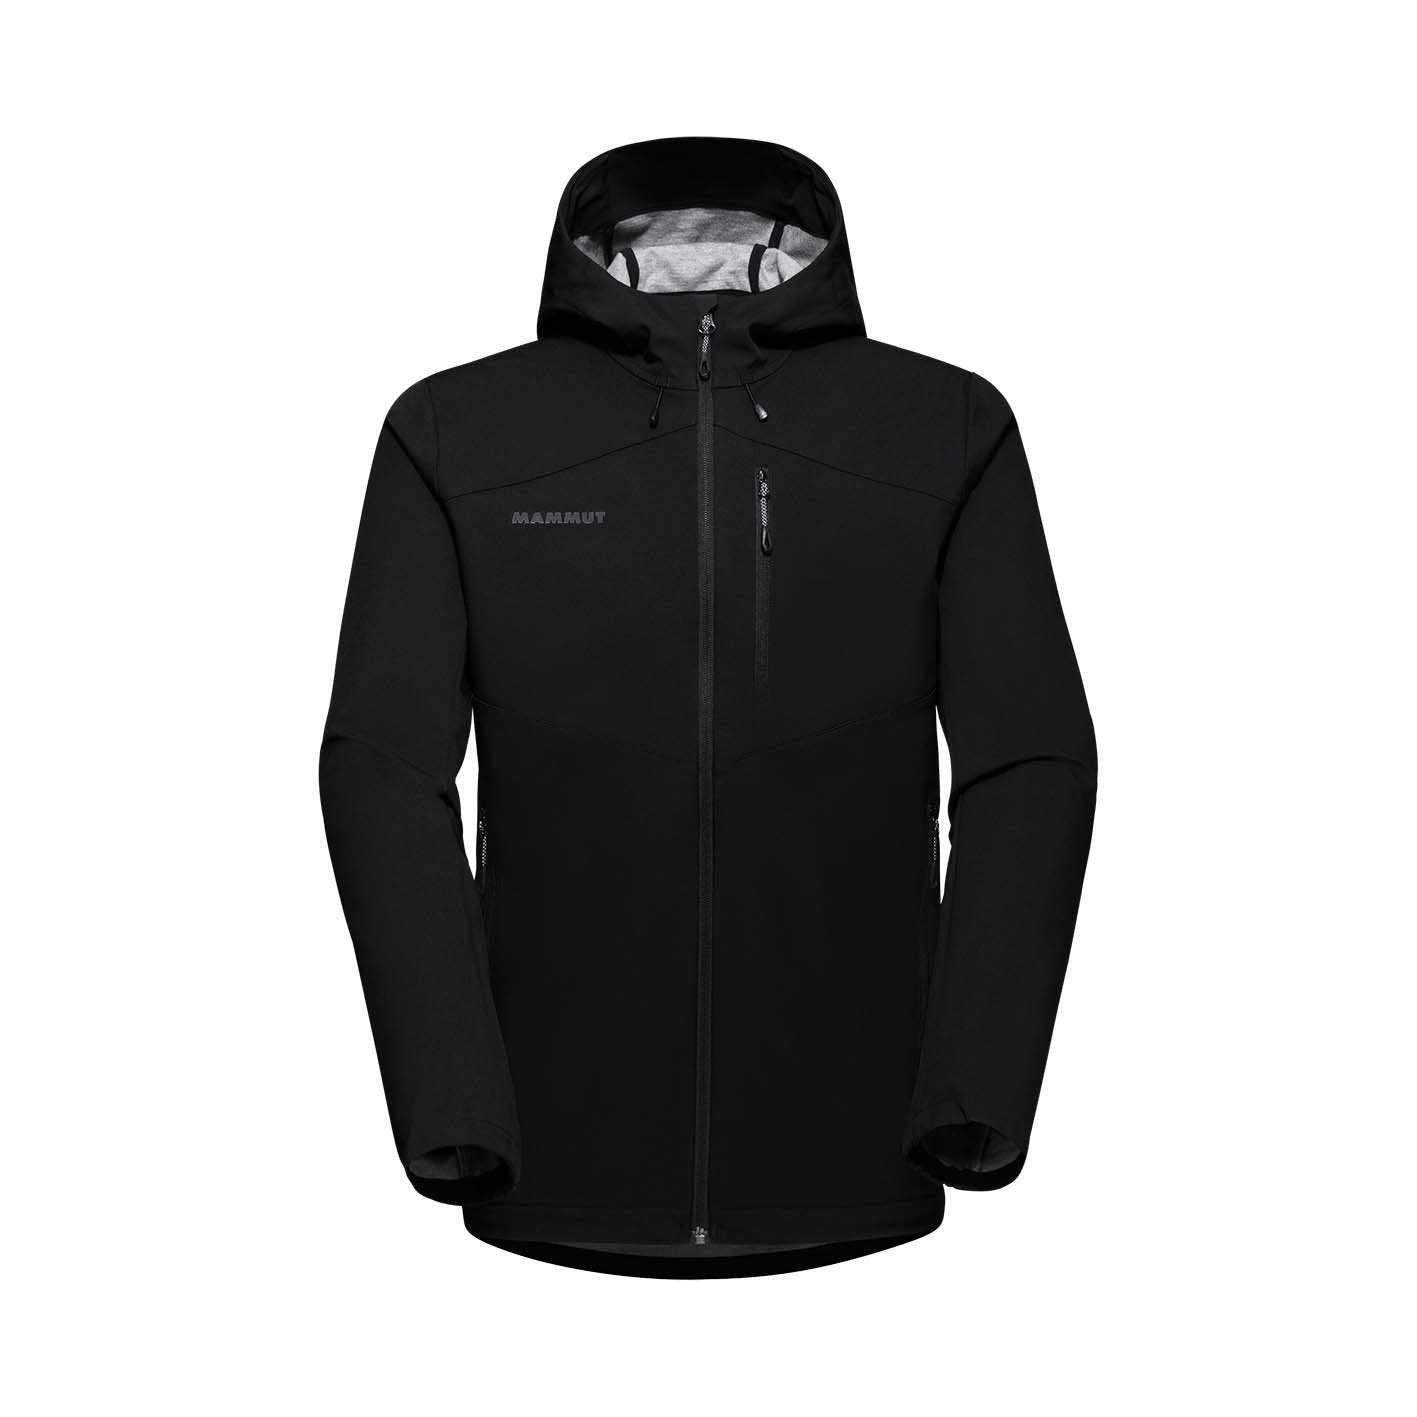 Men's Corporate Softshell Hooded Jacket by Mammut & The Luxury ...